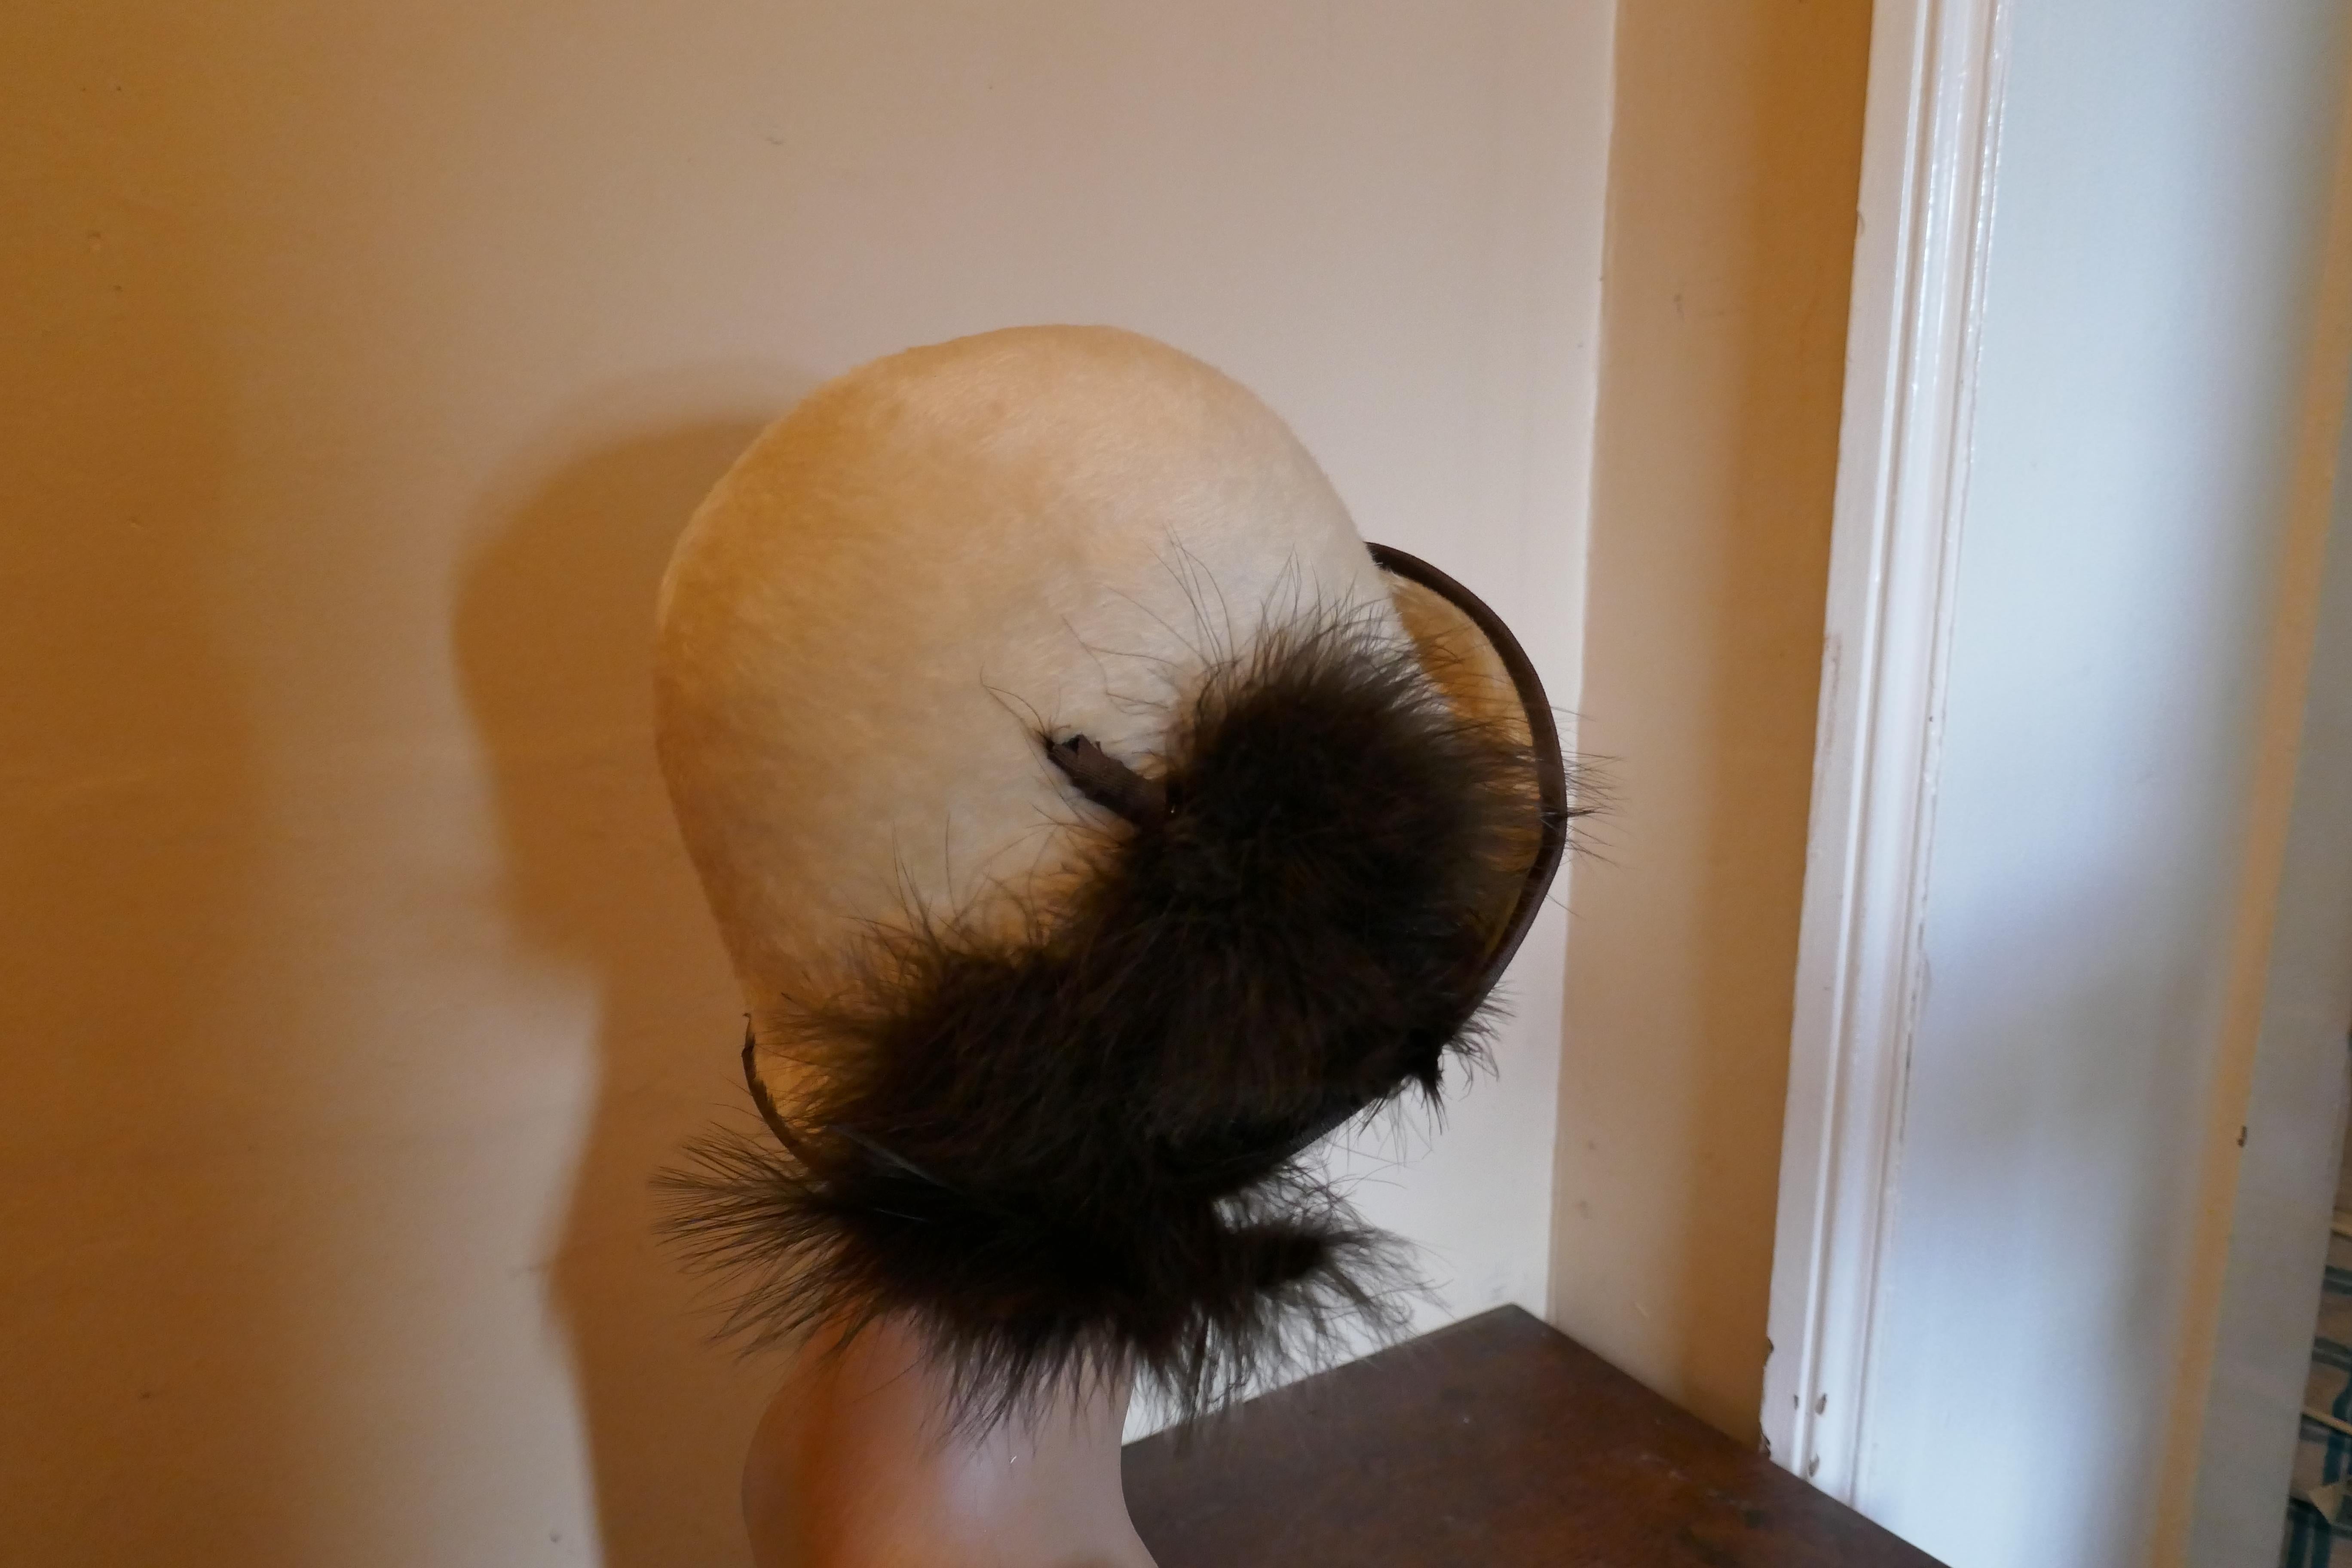 The Most Beautiful 1920s Felt Fur Cloche Hat by Bermona

Superb Soft Fur Fabric Cloche hat classic 1920s Head Hugging Style, an offset up turned brim trimmed with Ostrich Feather

The hat is very fine quality and in good condition, the inside